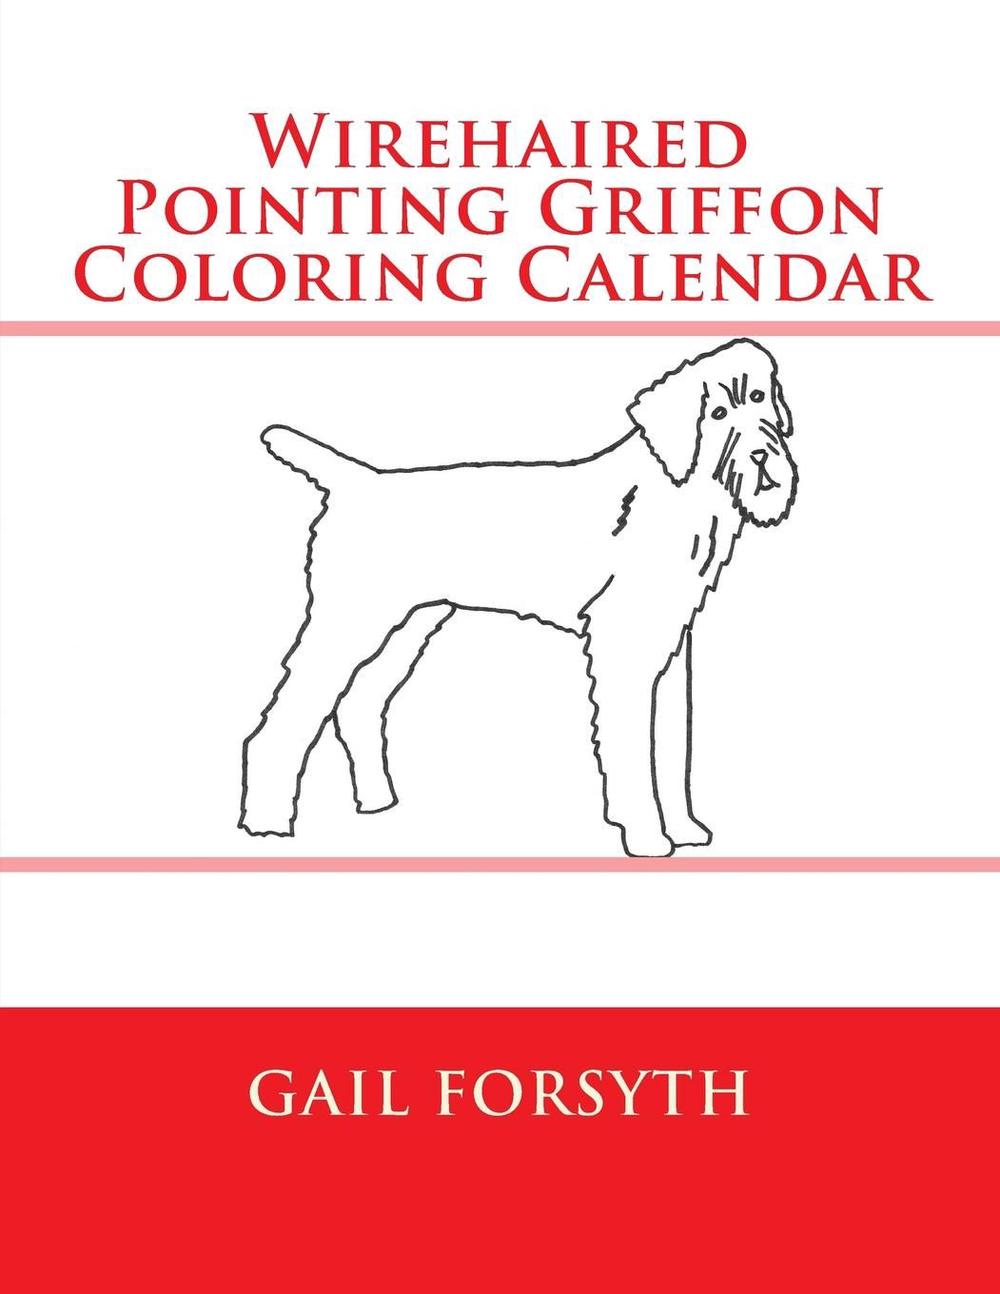 Wirehaired Pointing Griffon Coloring Calendar by Gail Forsyth (English